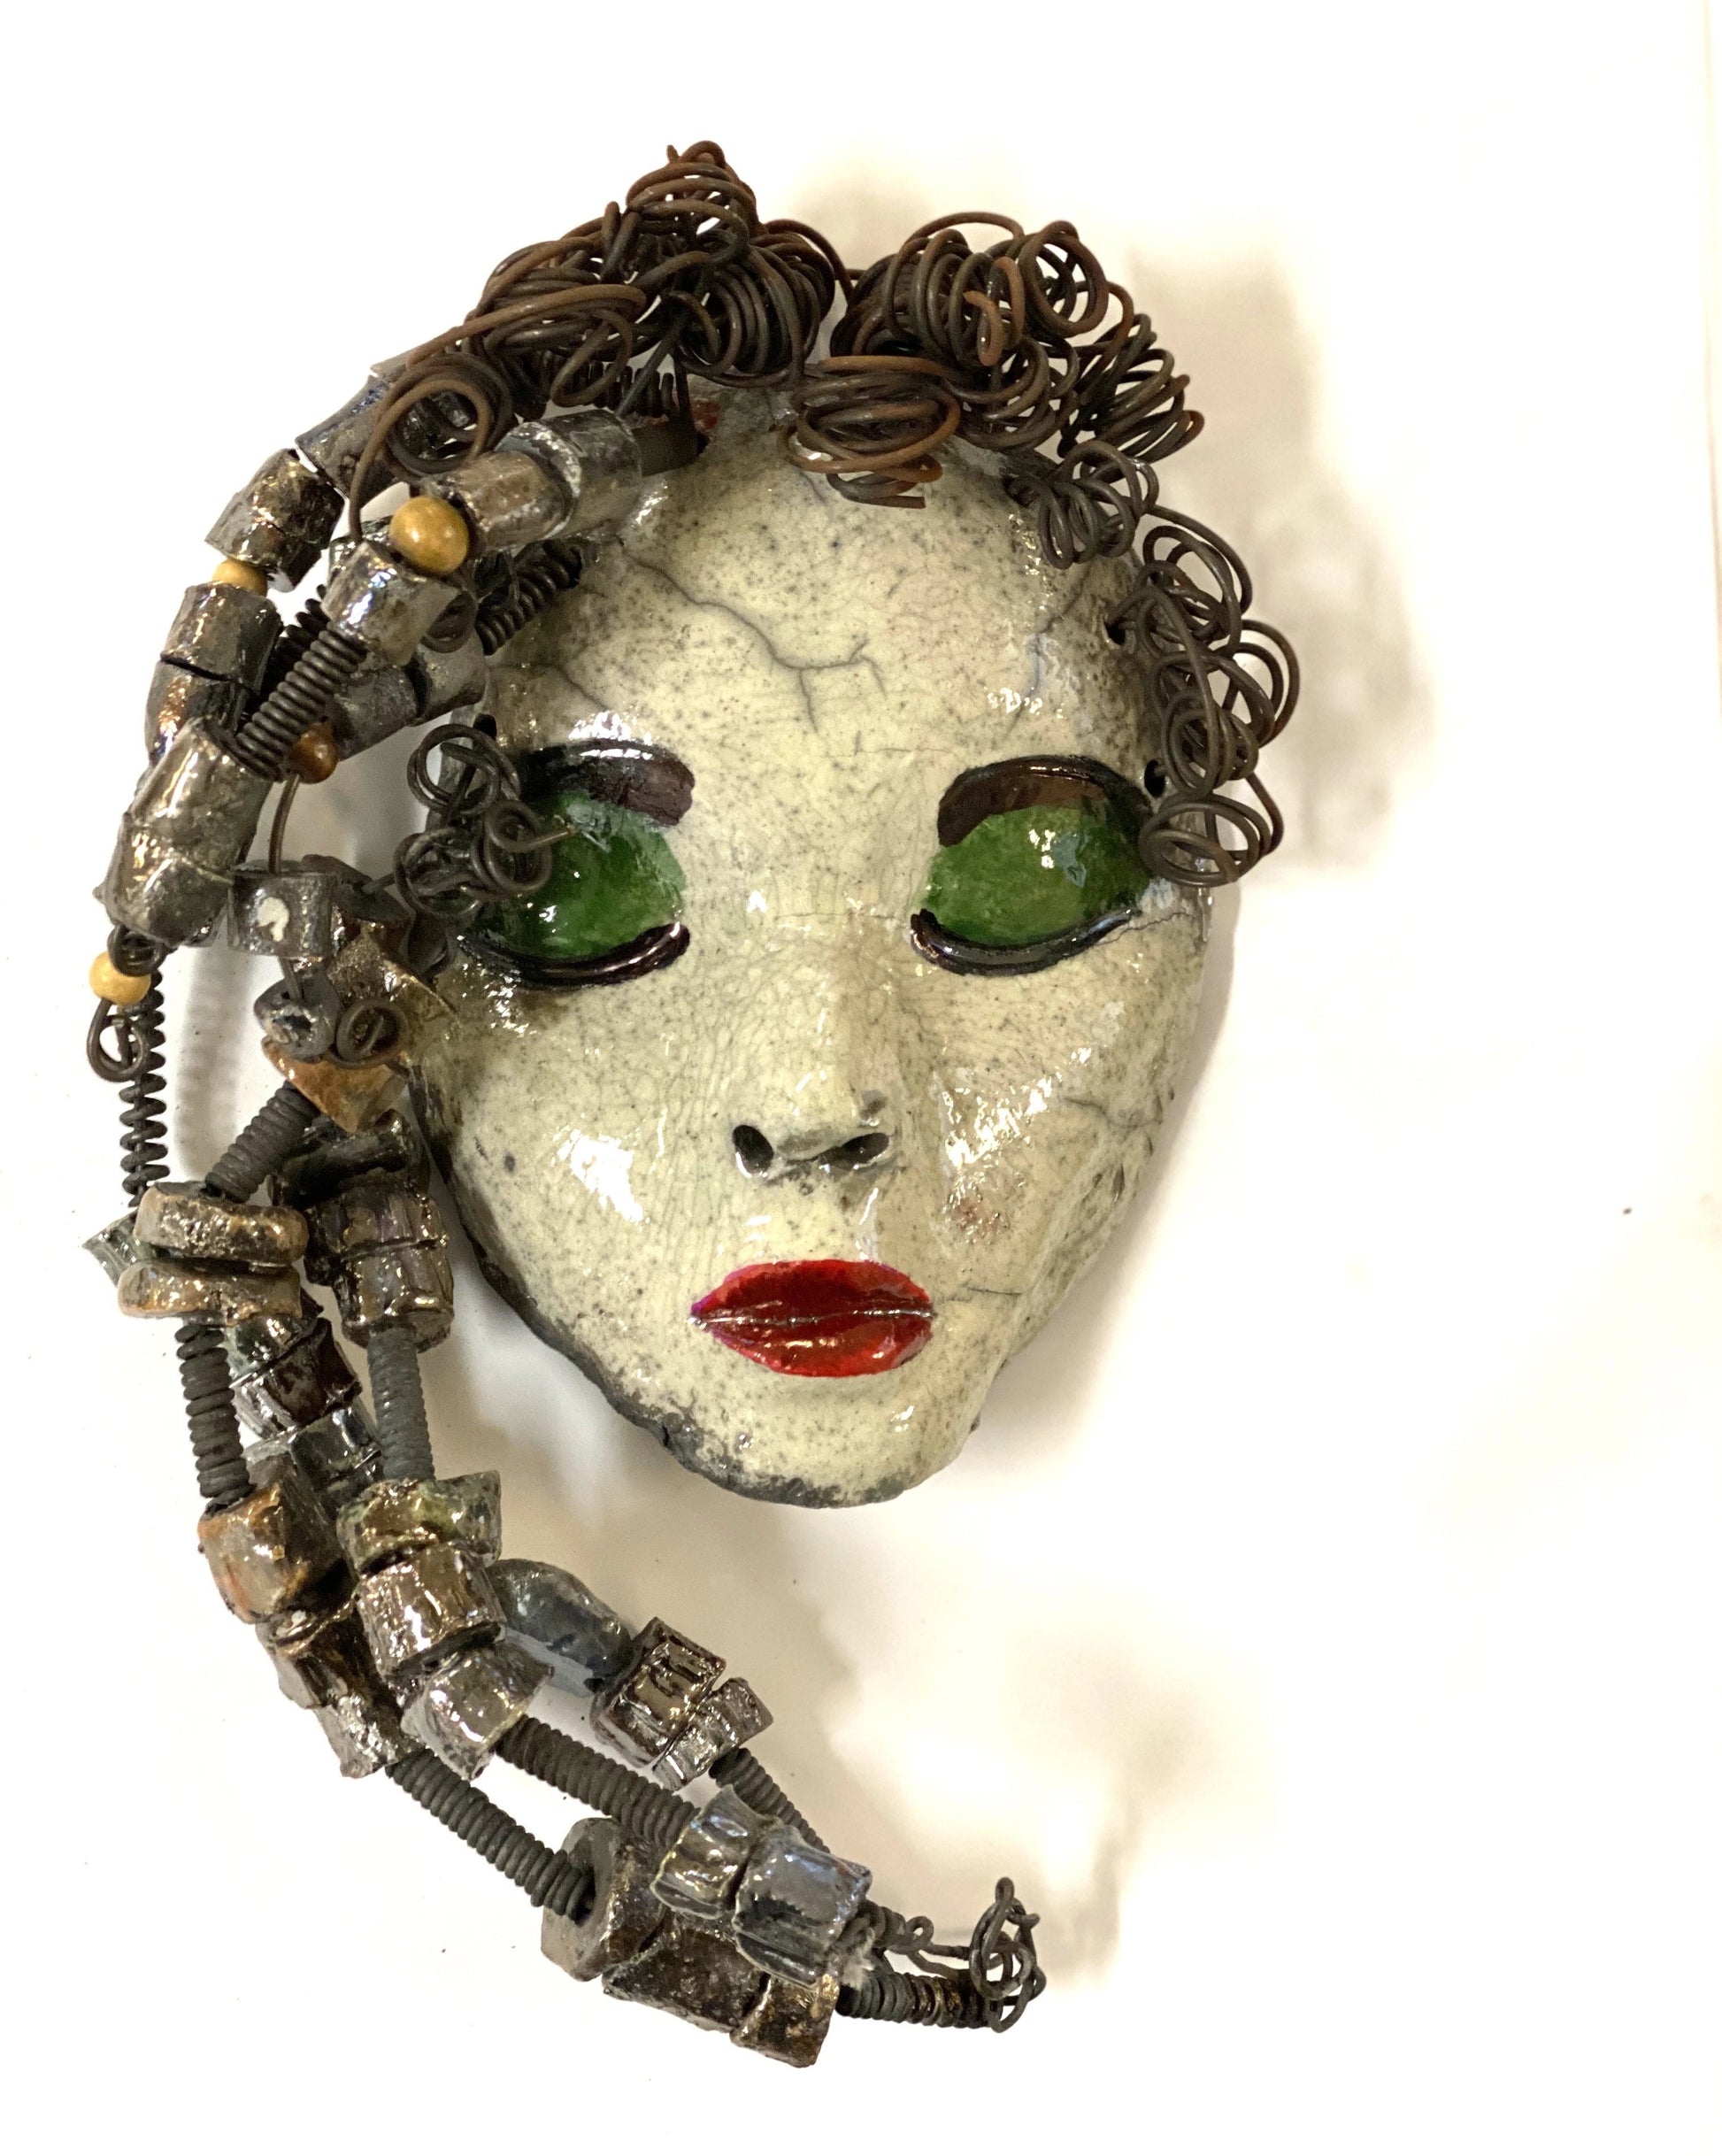 Mckenzie has a white complexion, green eye shadow, and ruby red lips! She is 7”x 5”" and weighs 1.8 lbs. Mckenzie  has over 20 handmade raku fired beads. She has over 20 feet of coiled 16 gauge wire hair.